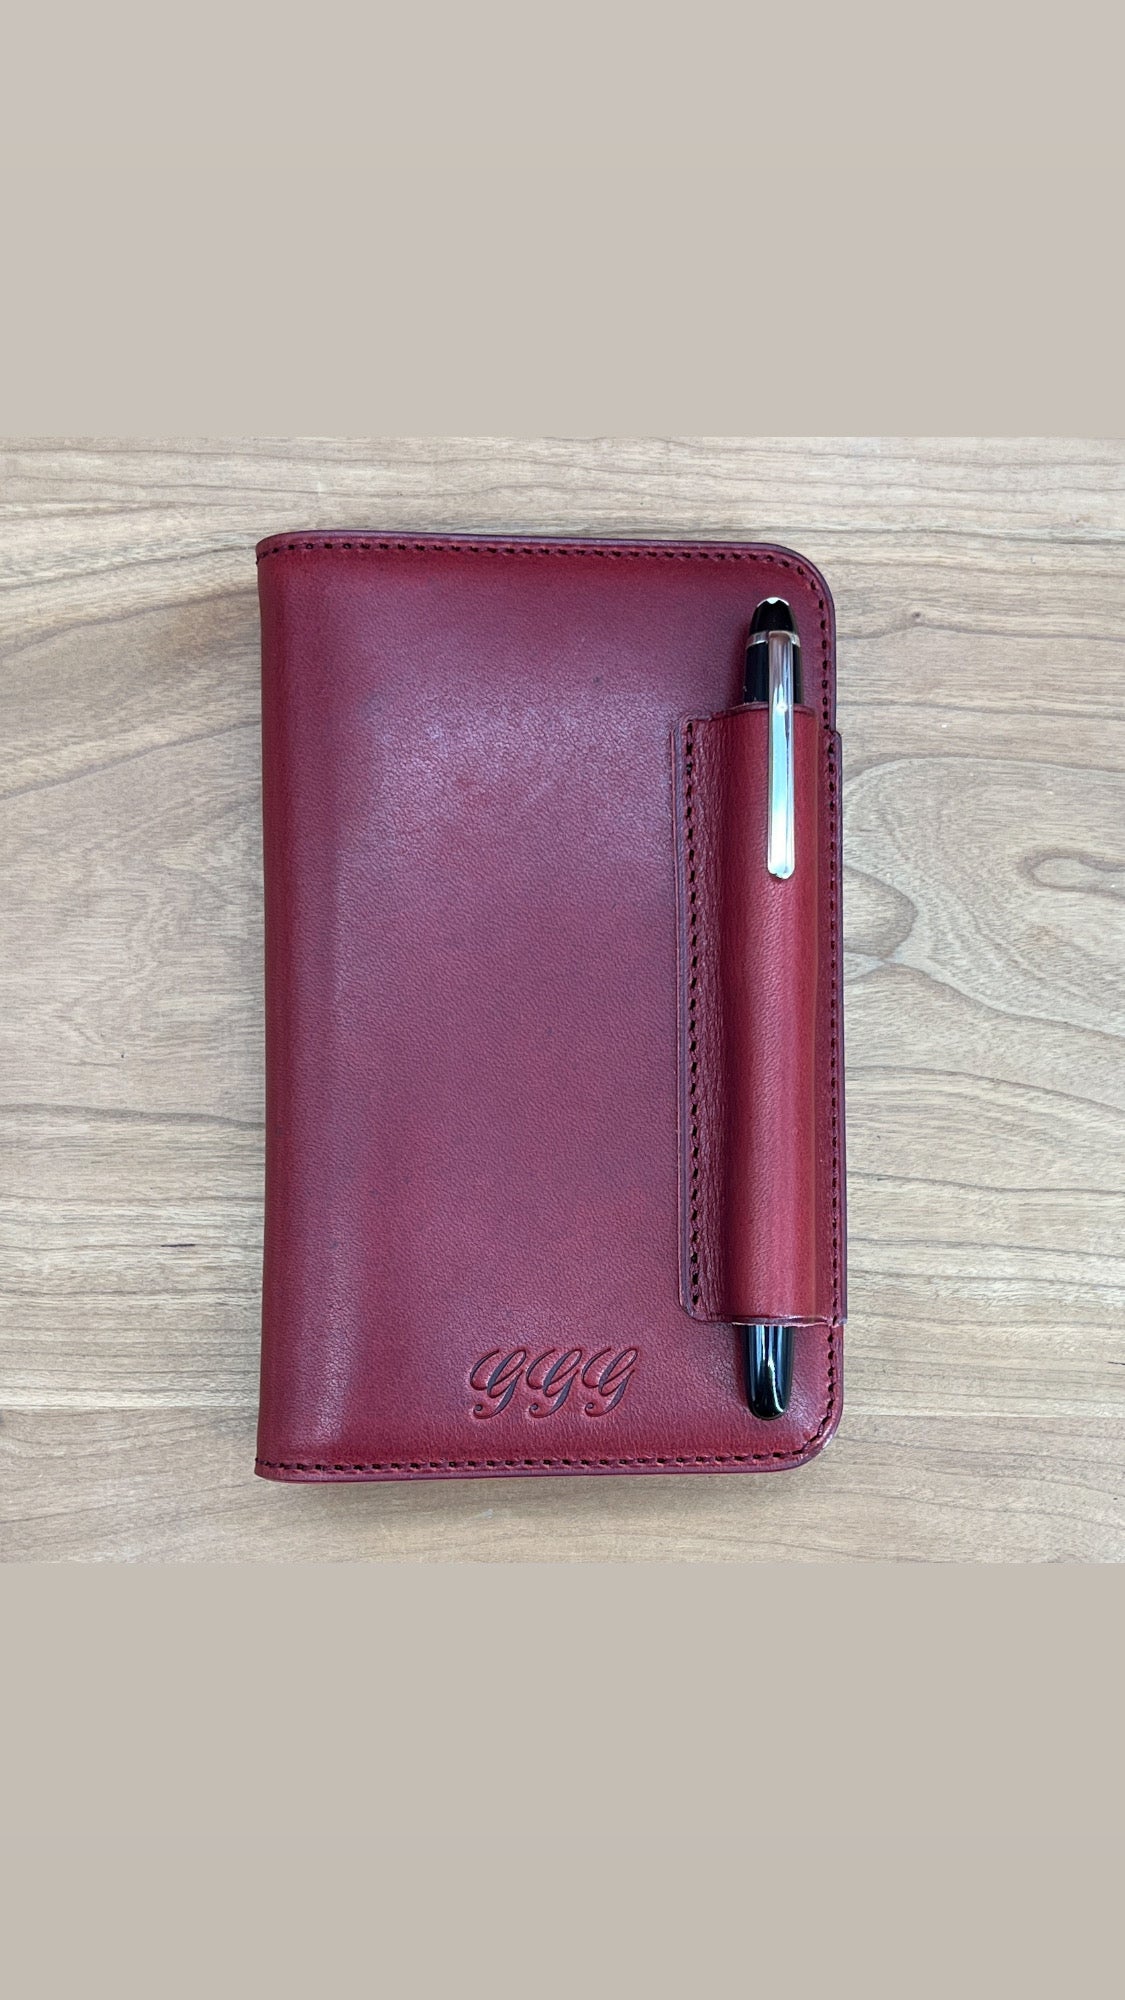 Handmade London Red Horween Leather Notebook Cover for Pocket Notebooks.